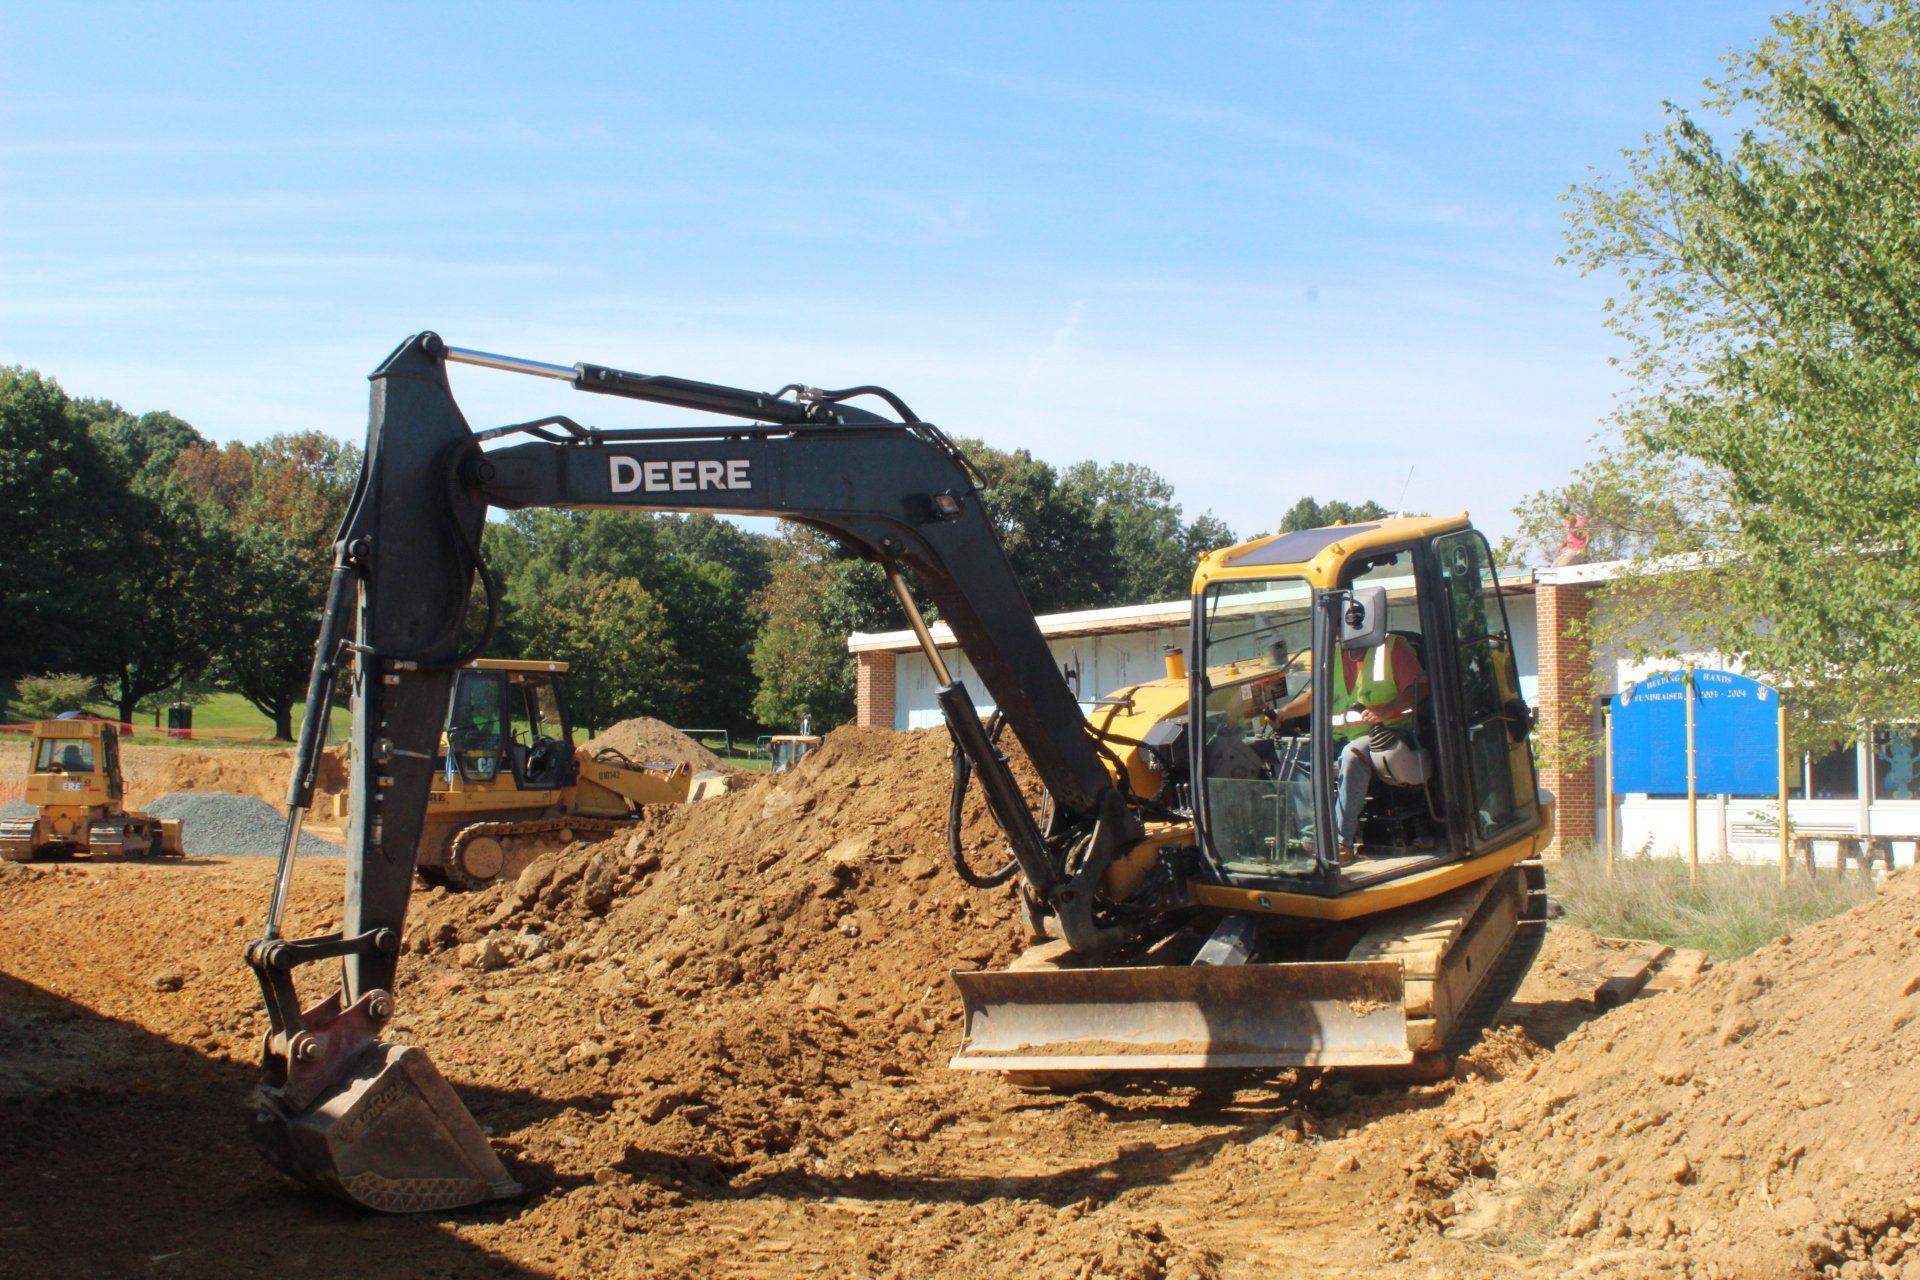 A deere excavator is digging a hole in the dirt